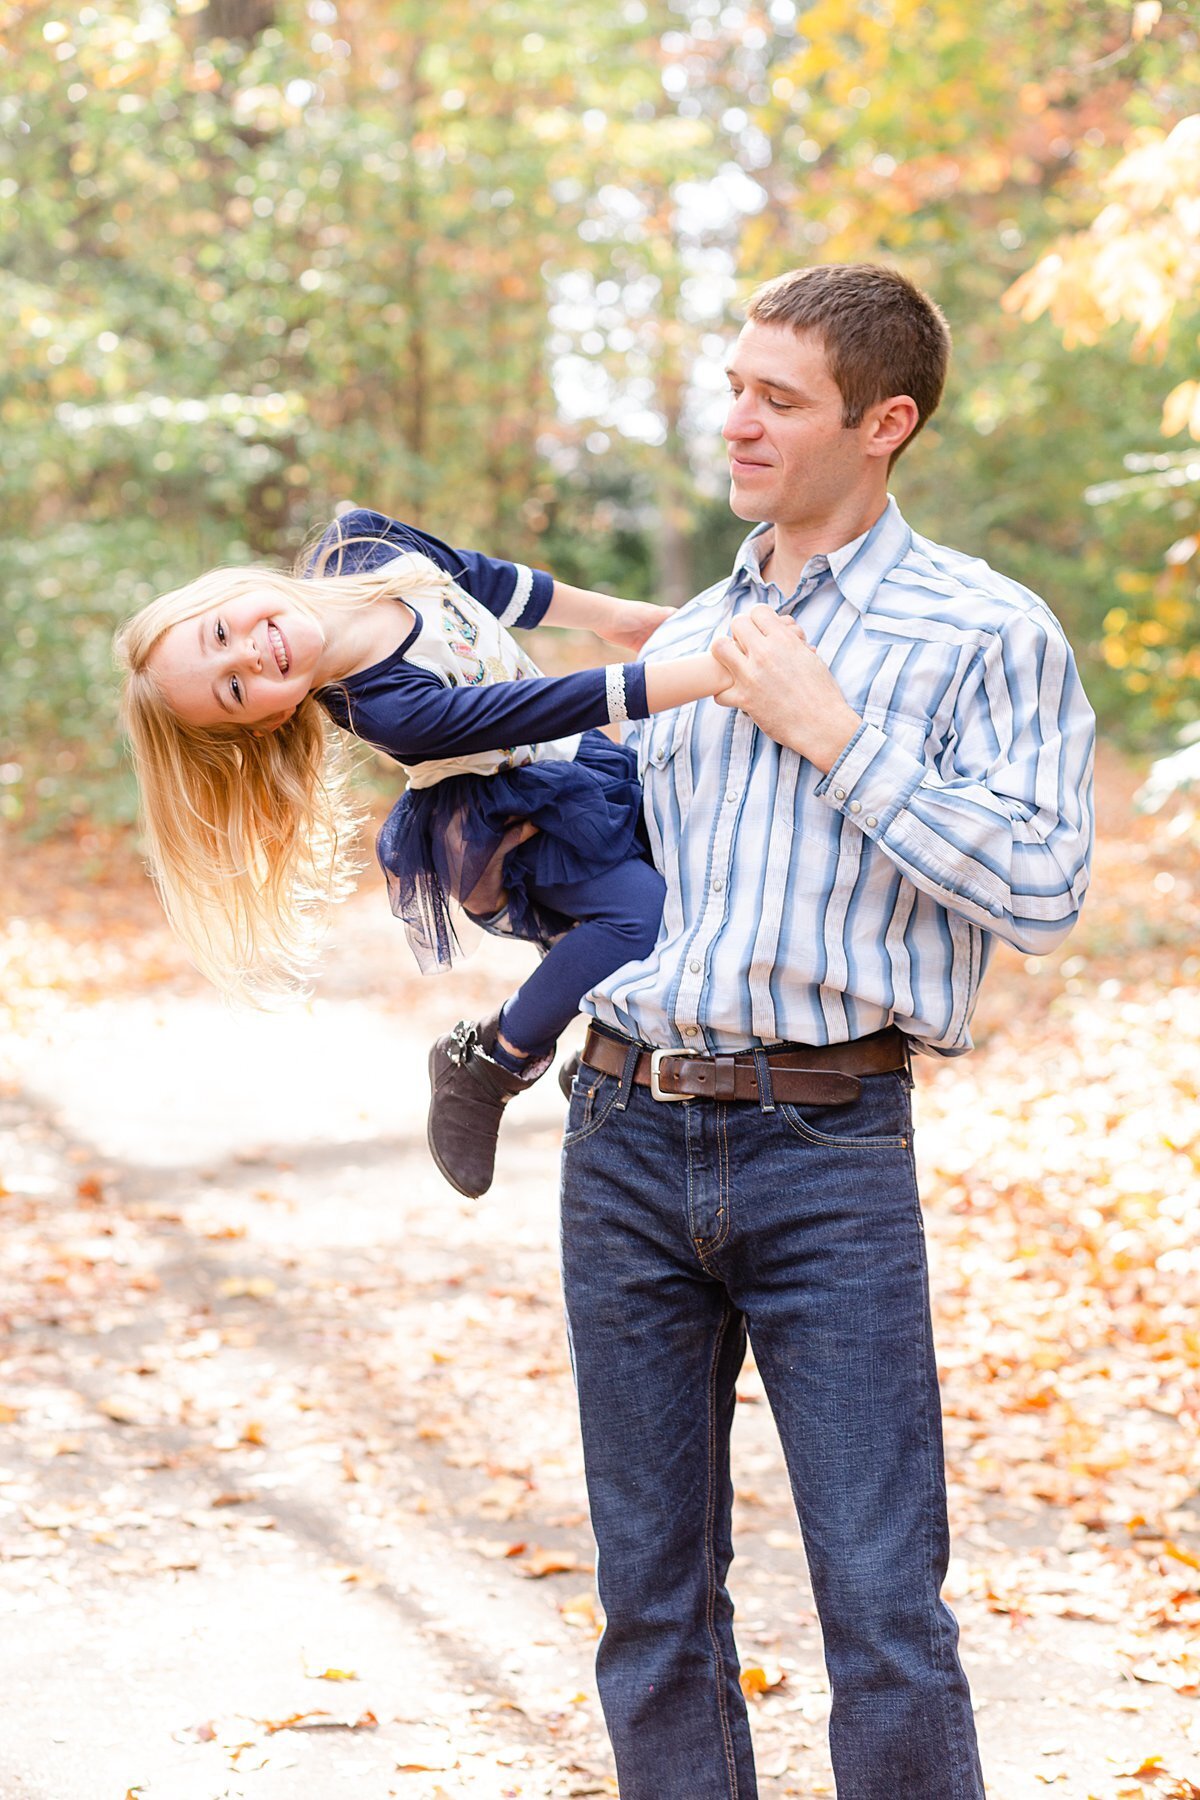 outdoor-fall-mini-sessions-cleveland-park-greenville-sc-5